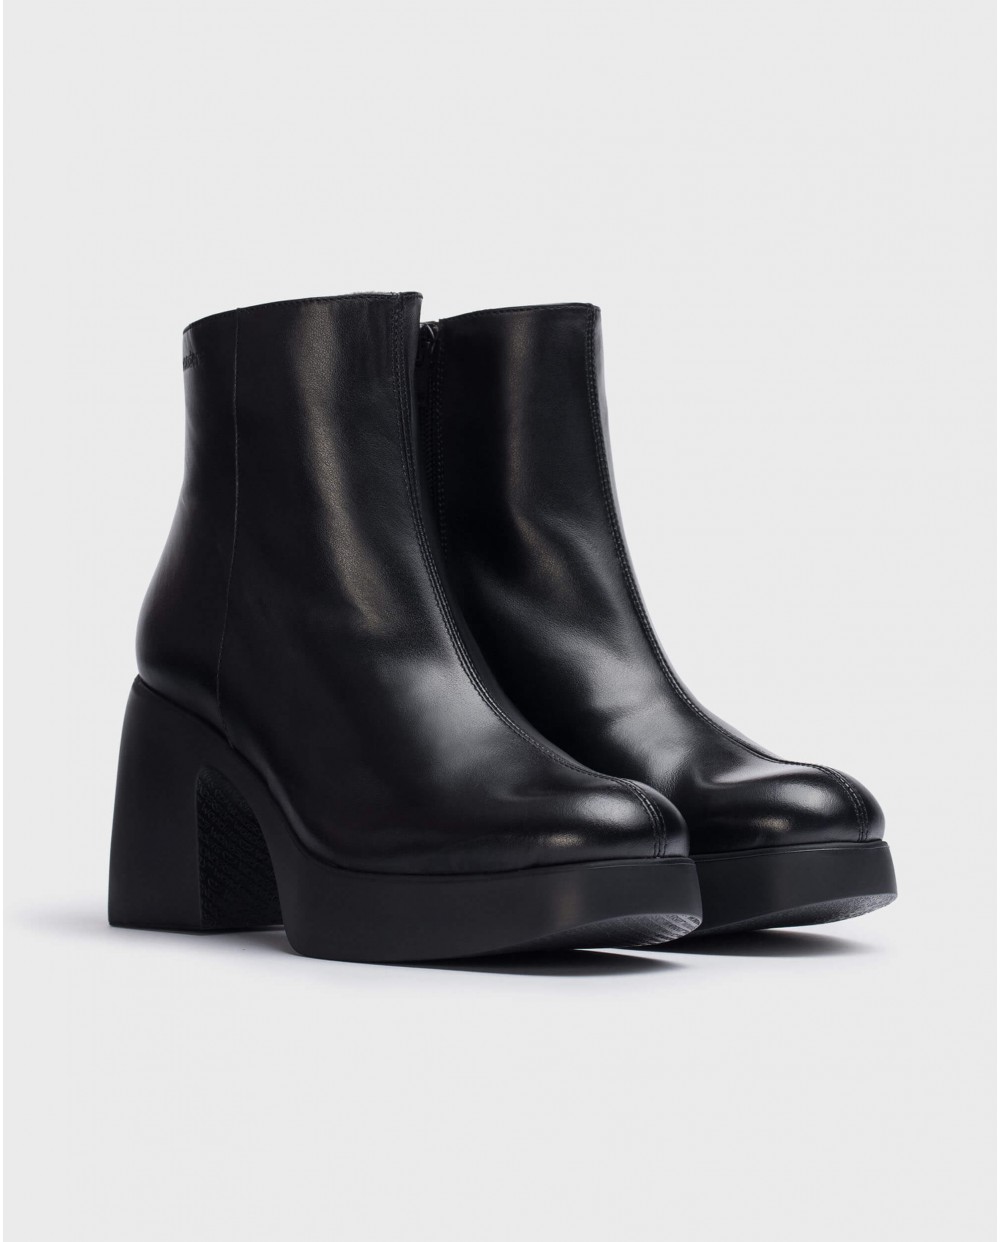 Wonders-New in-Mex Ankle Boot